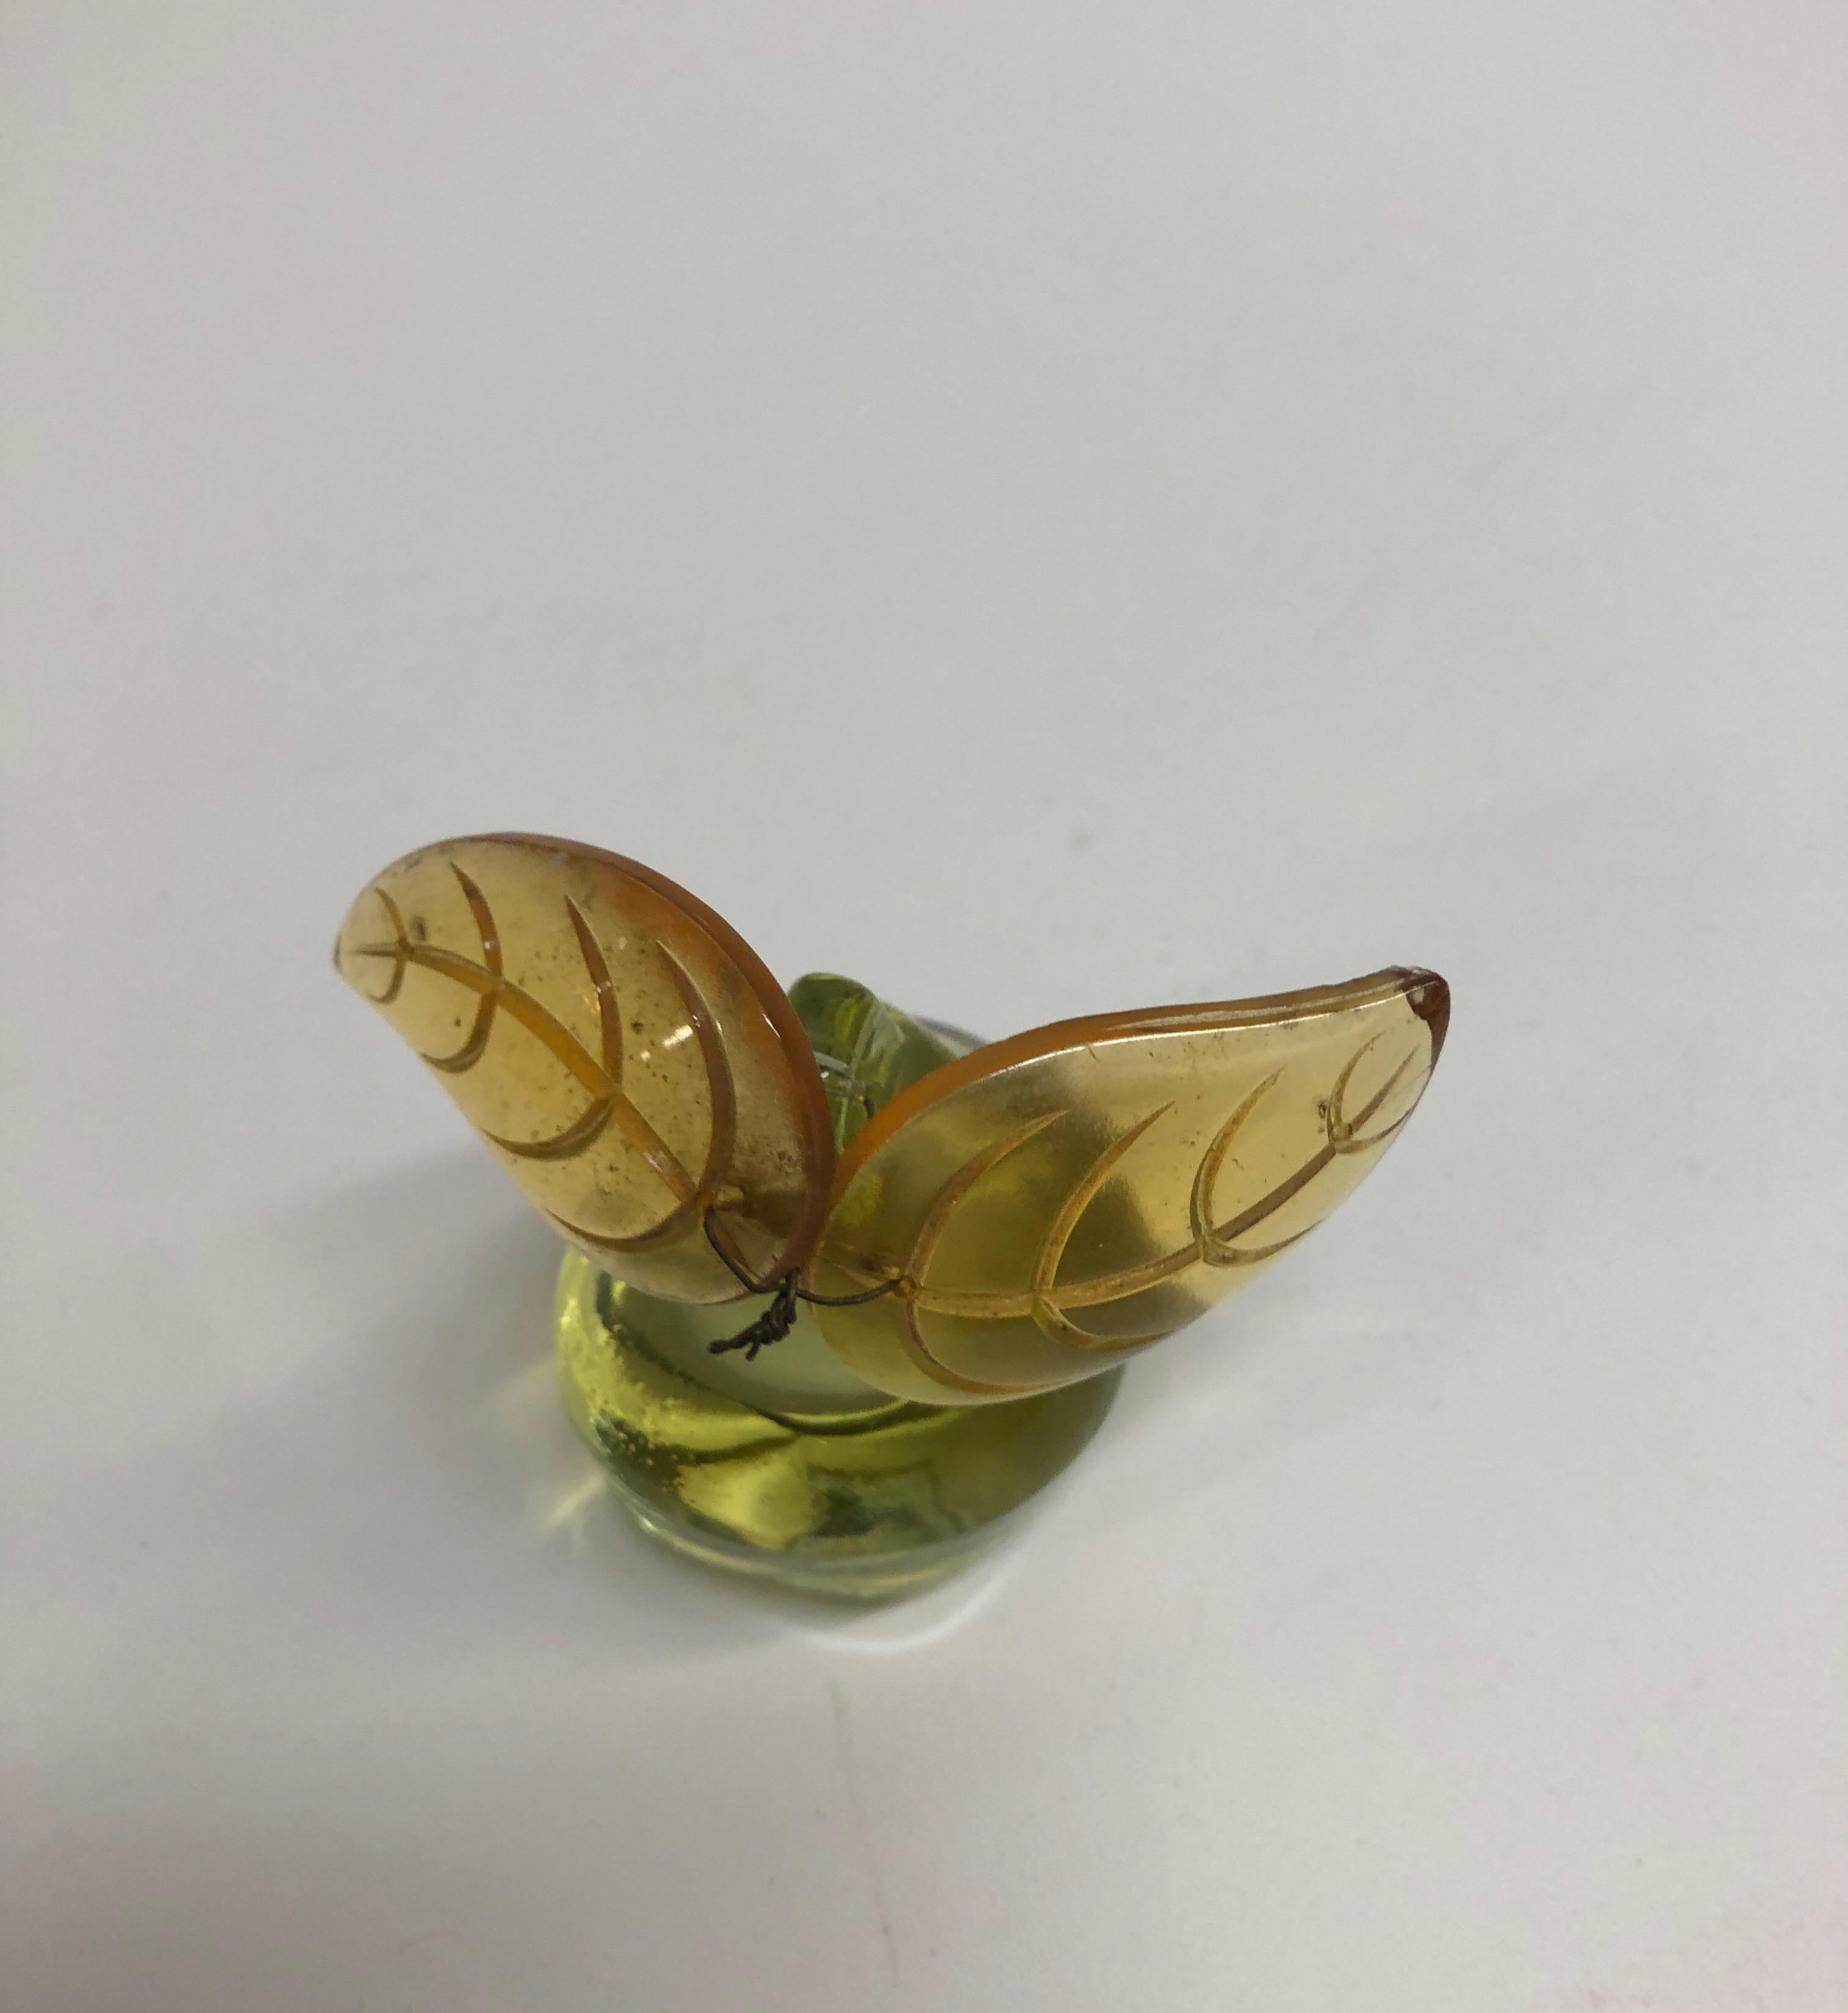 Antique crystal chandelier pear adornment.
Real Baccarat crystal pear that used to hand at the bottom of a chandelier.
Pera comes with two leaves as you see in the pictures. Green pear with golden color leaves.
Size: 2